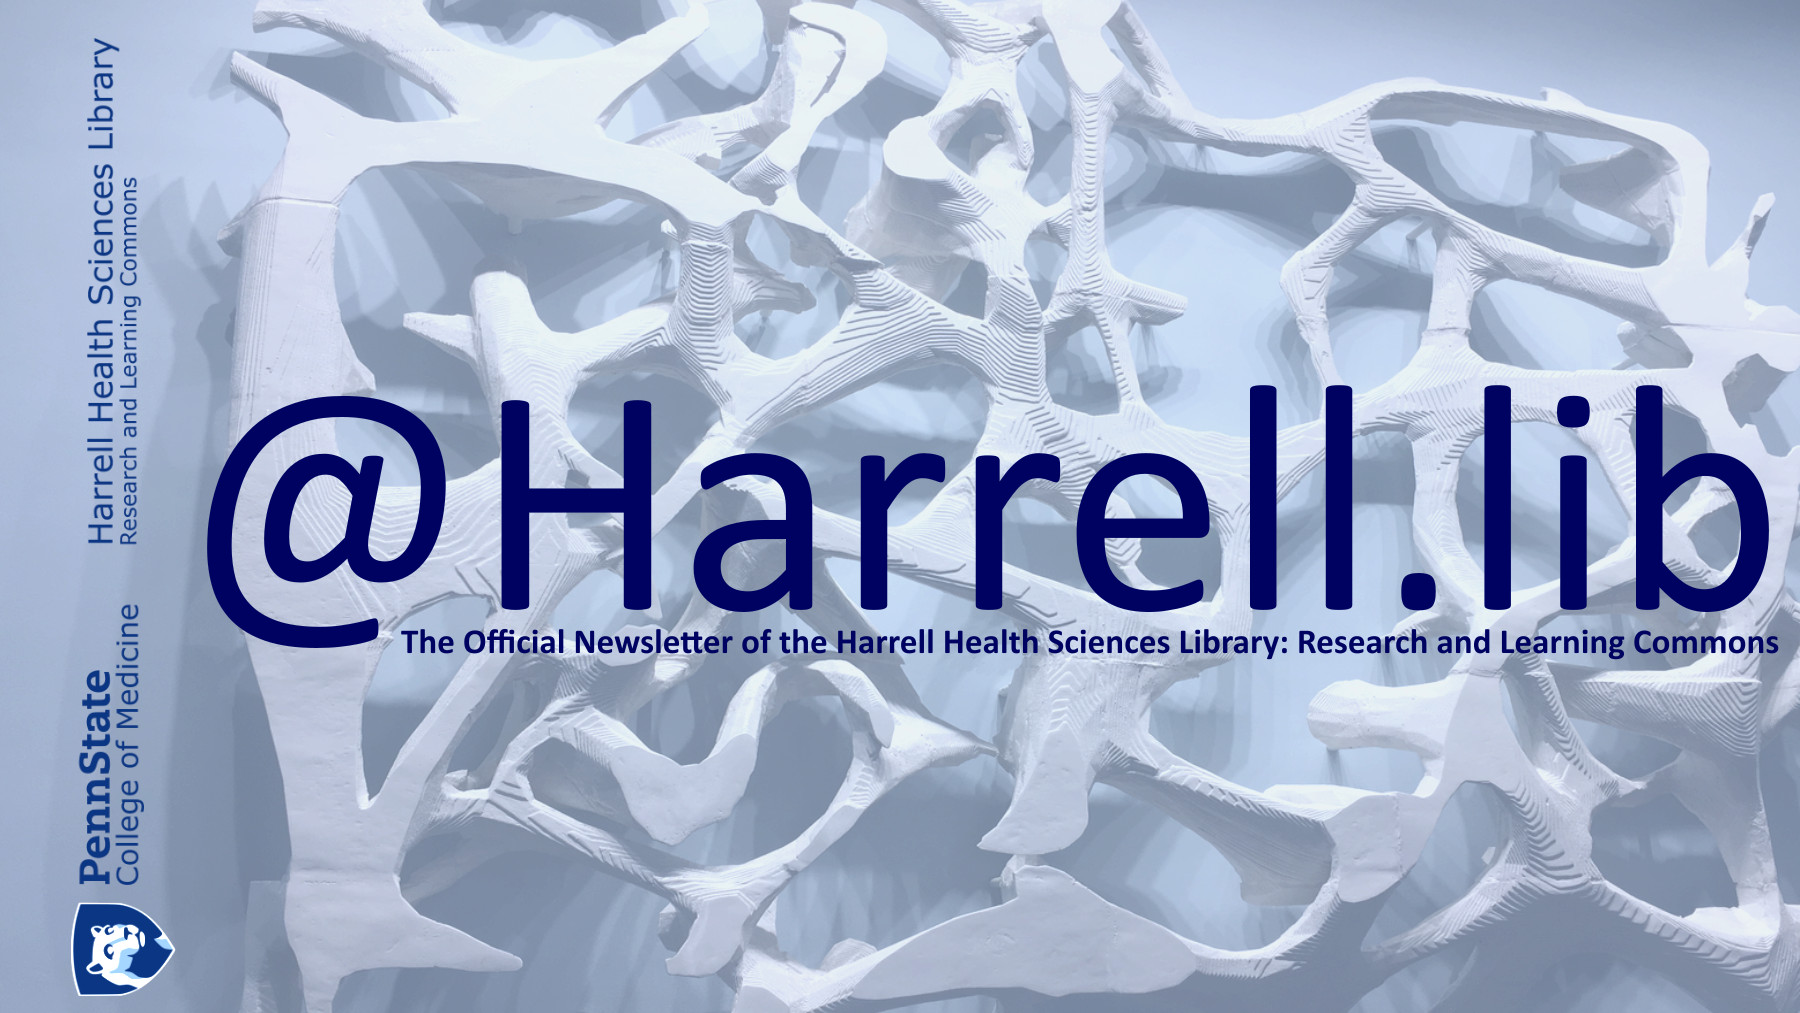 Library's quarterly newsletter header image with text of @Harrell.lib The Official Newsletter of the Harrell Health Sciences Library: Research and Learning Commons